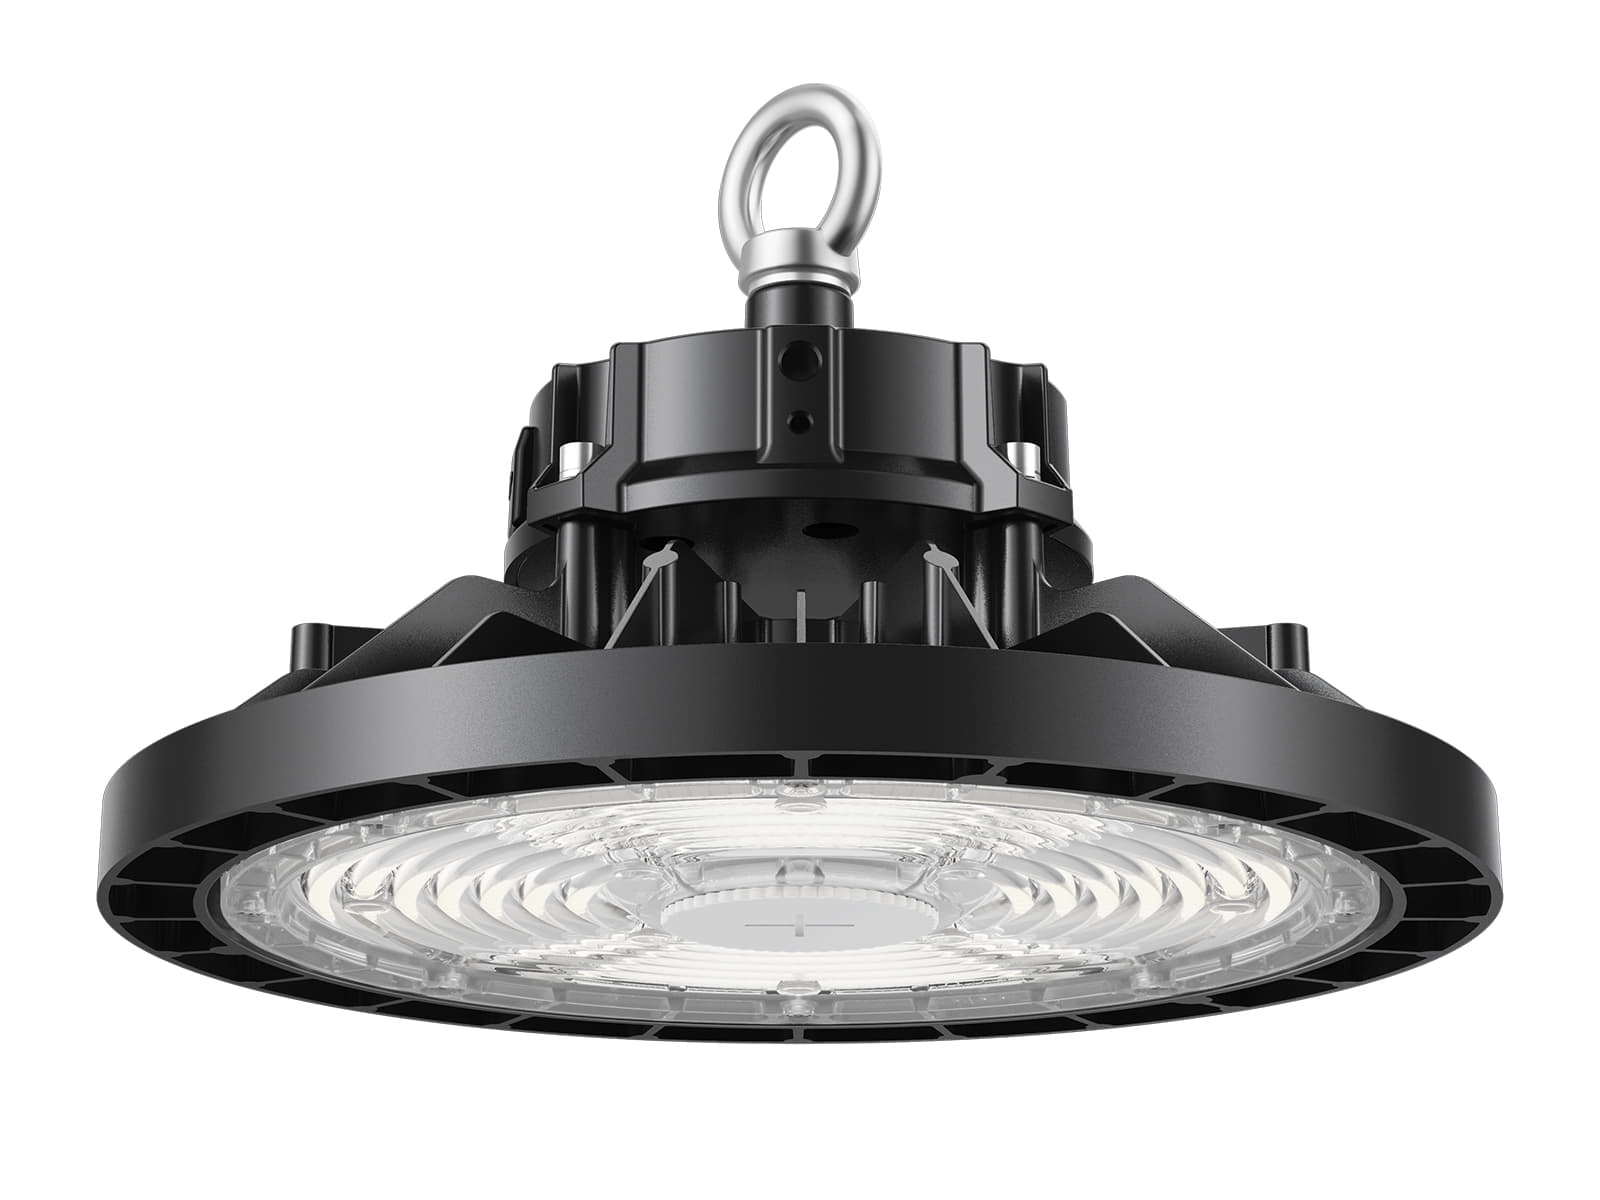 HB57 Cost-effective and Compact LED High Bay Light